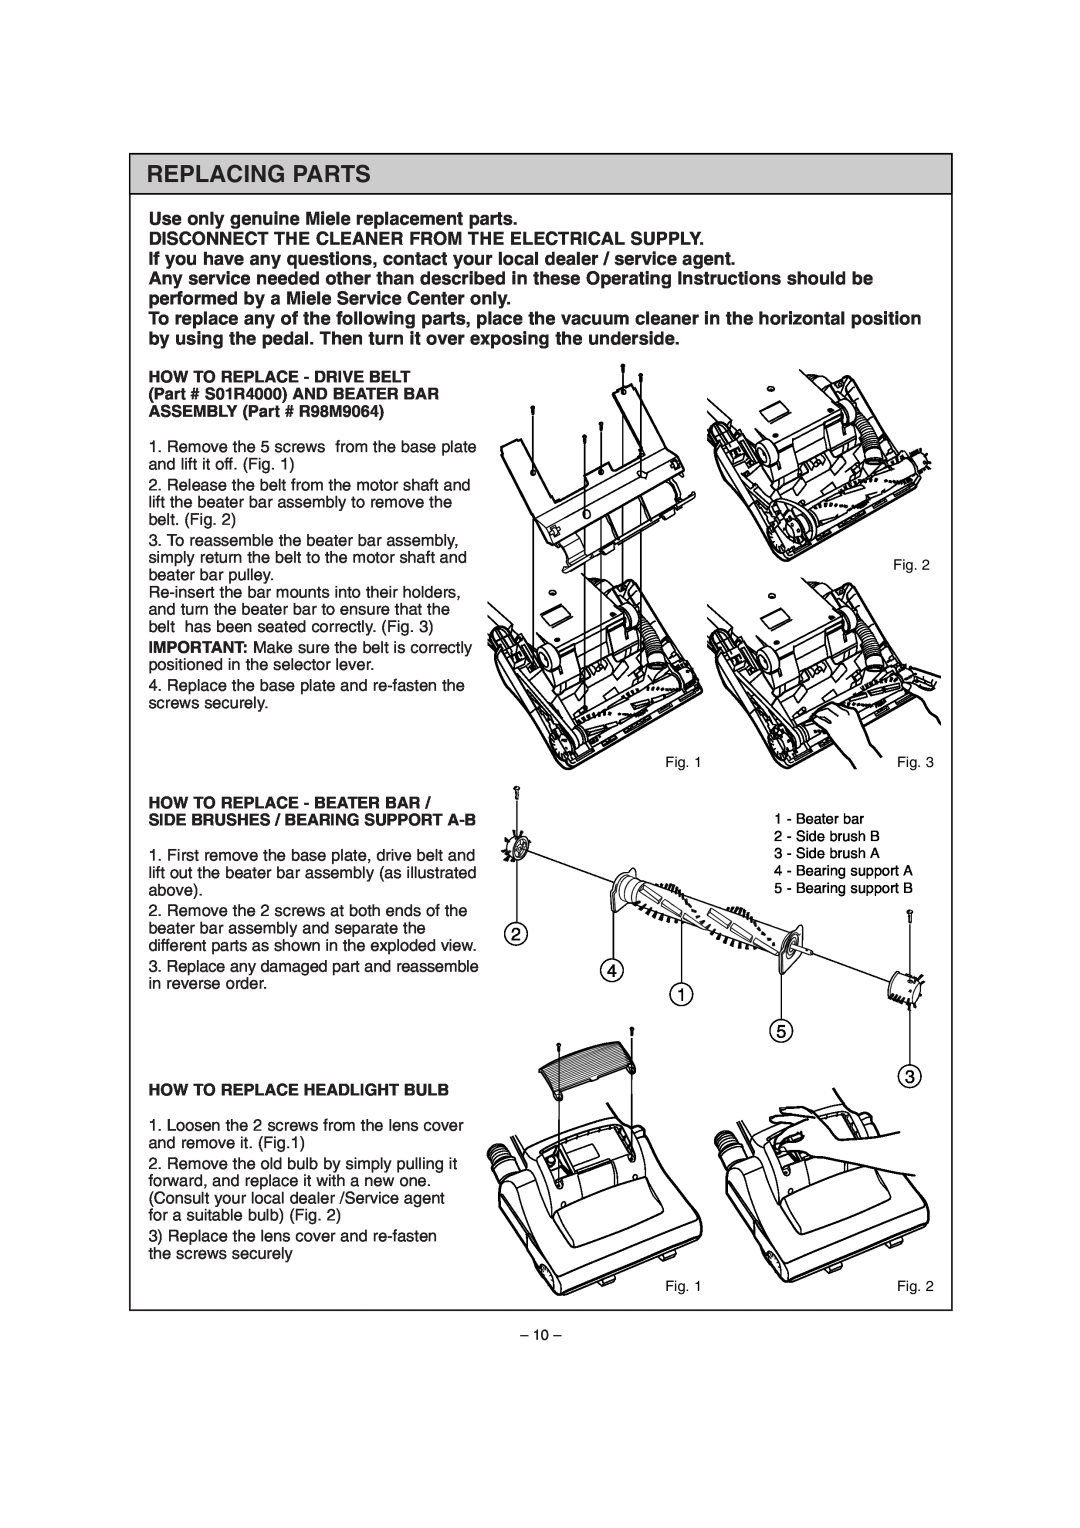 Miele S179i important safety instructions Replacing Parts 